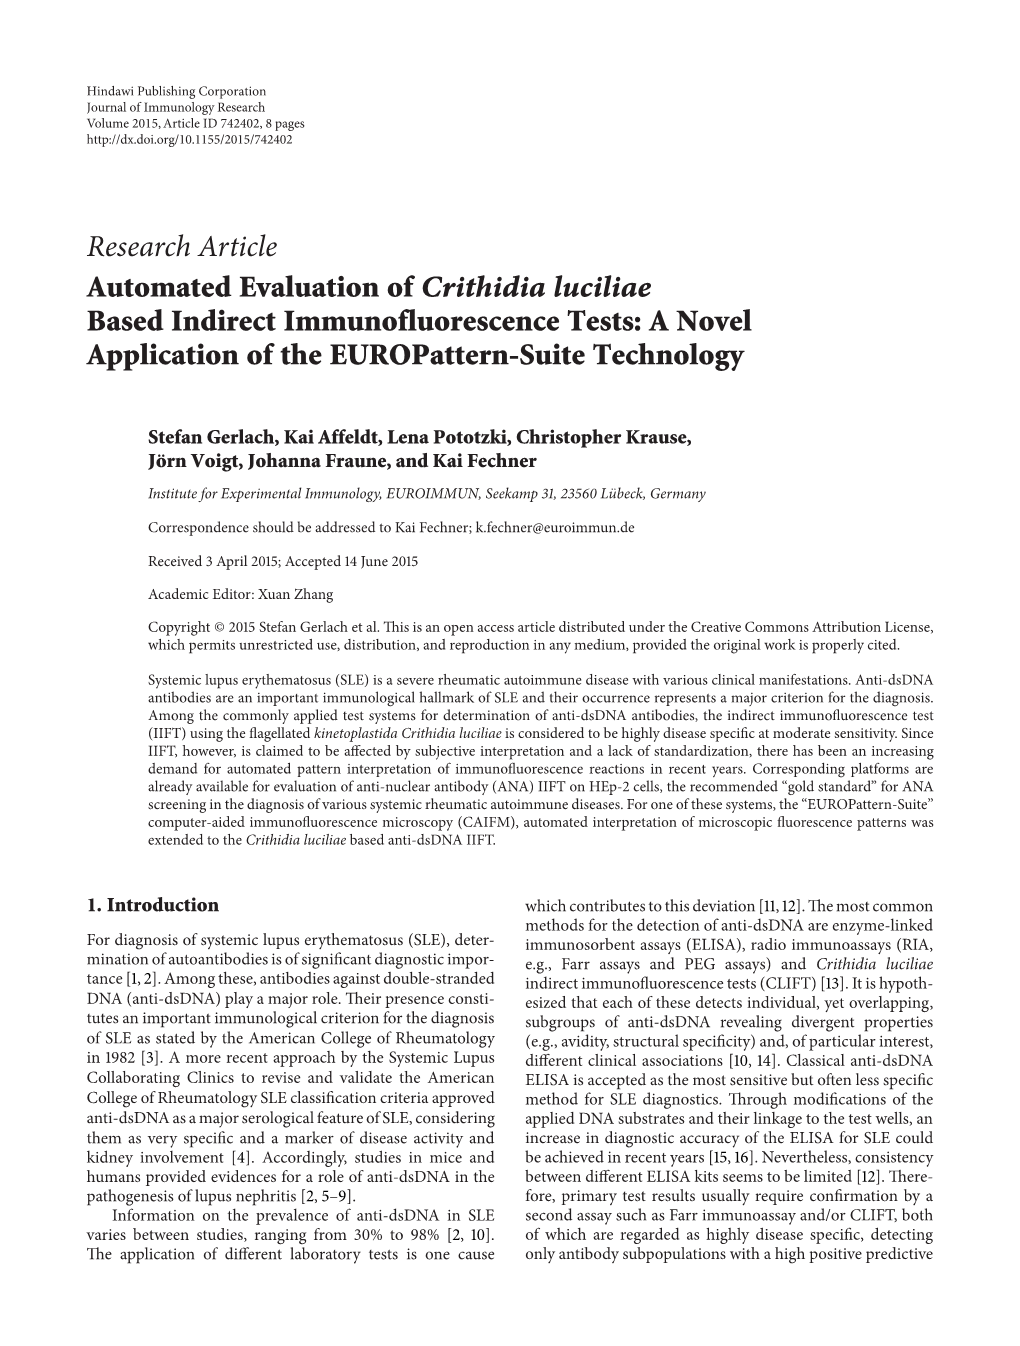 Research Article Automated Evaluation of Crithidia Luciliae Based Indirect Immunofluorescence Tests: a Novel Application of the Europattern-Suite Technology